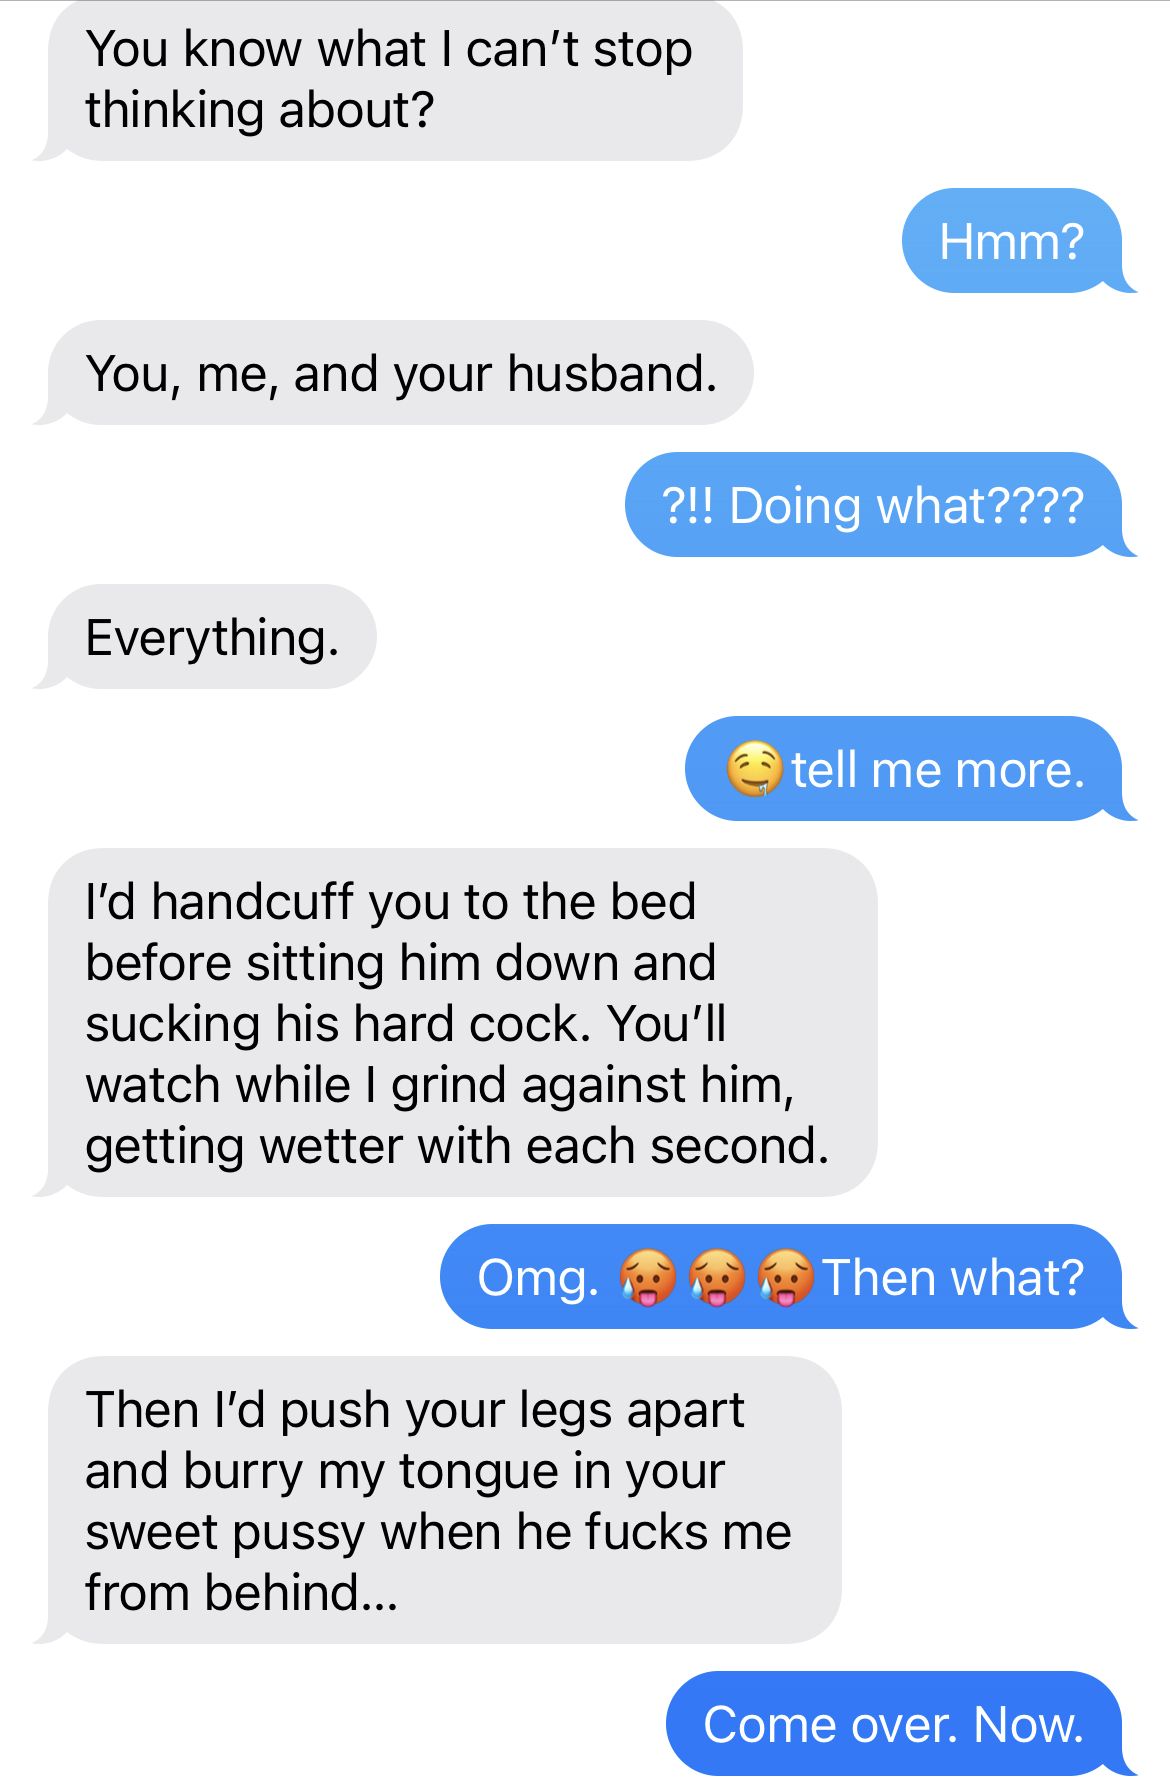 Showing my goods during a sex chat